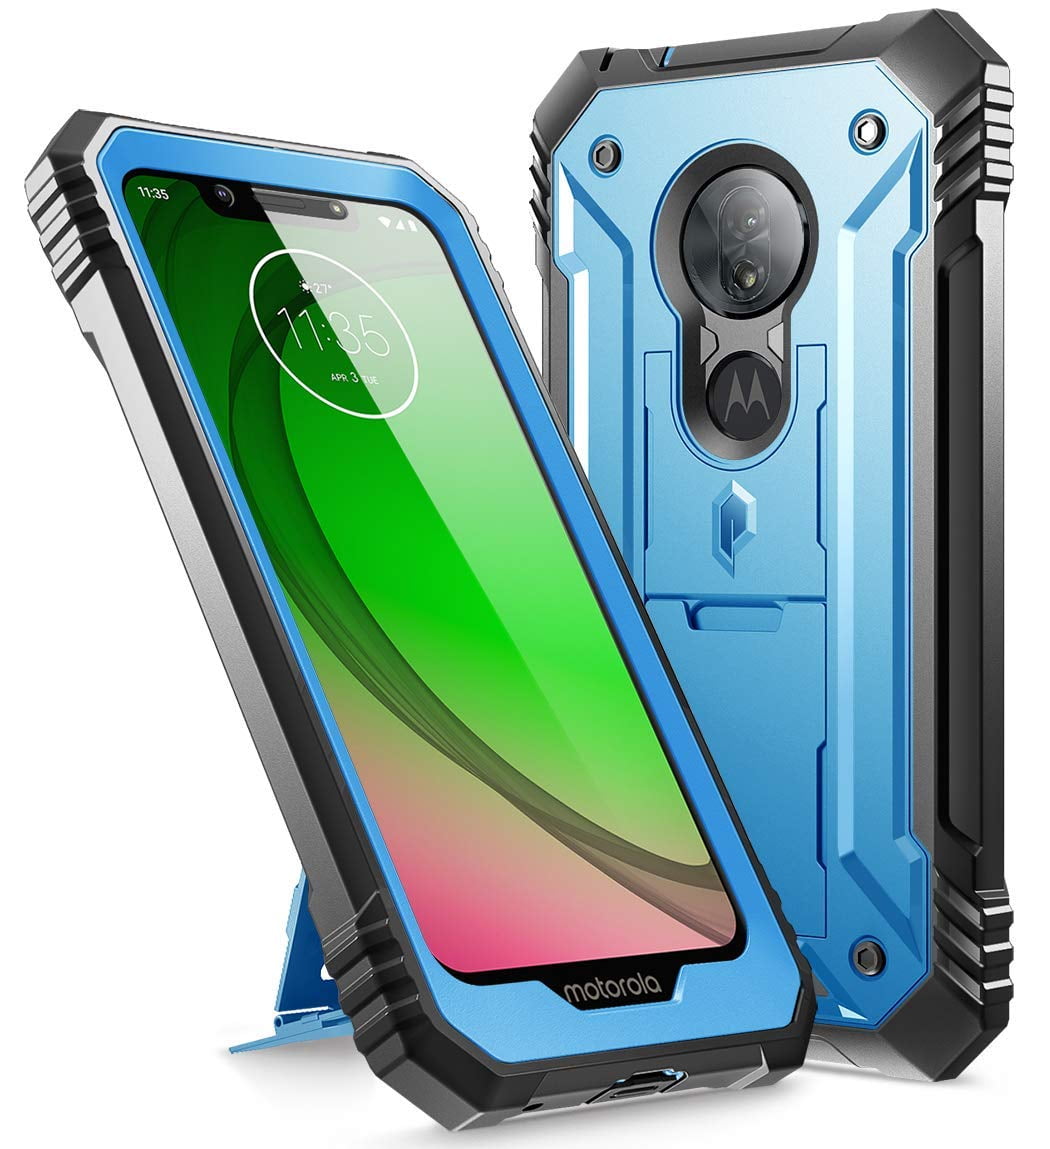 Moto G7 Play Rugged Case with Kickstand,Poetic FullBody